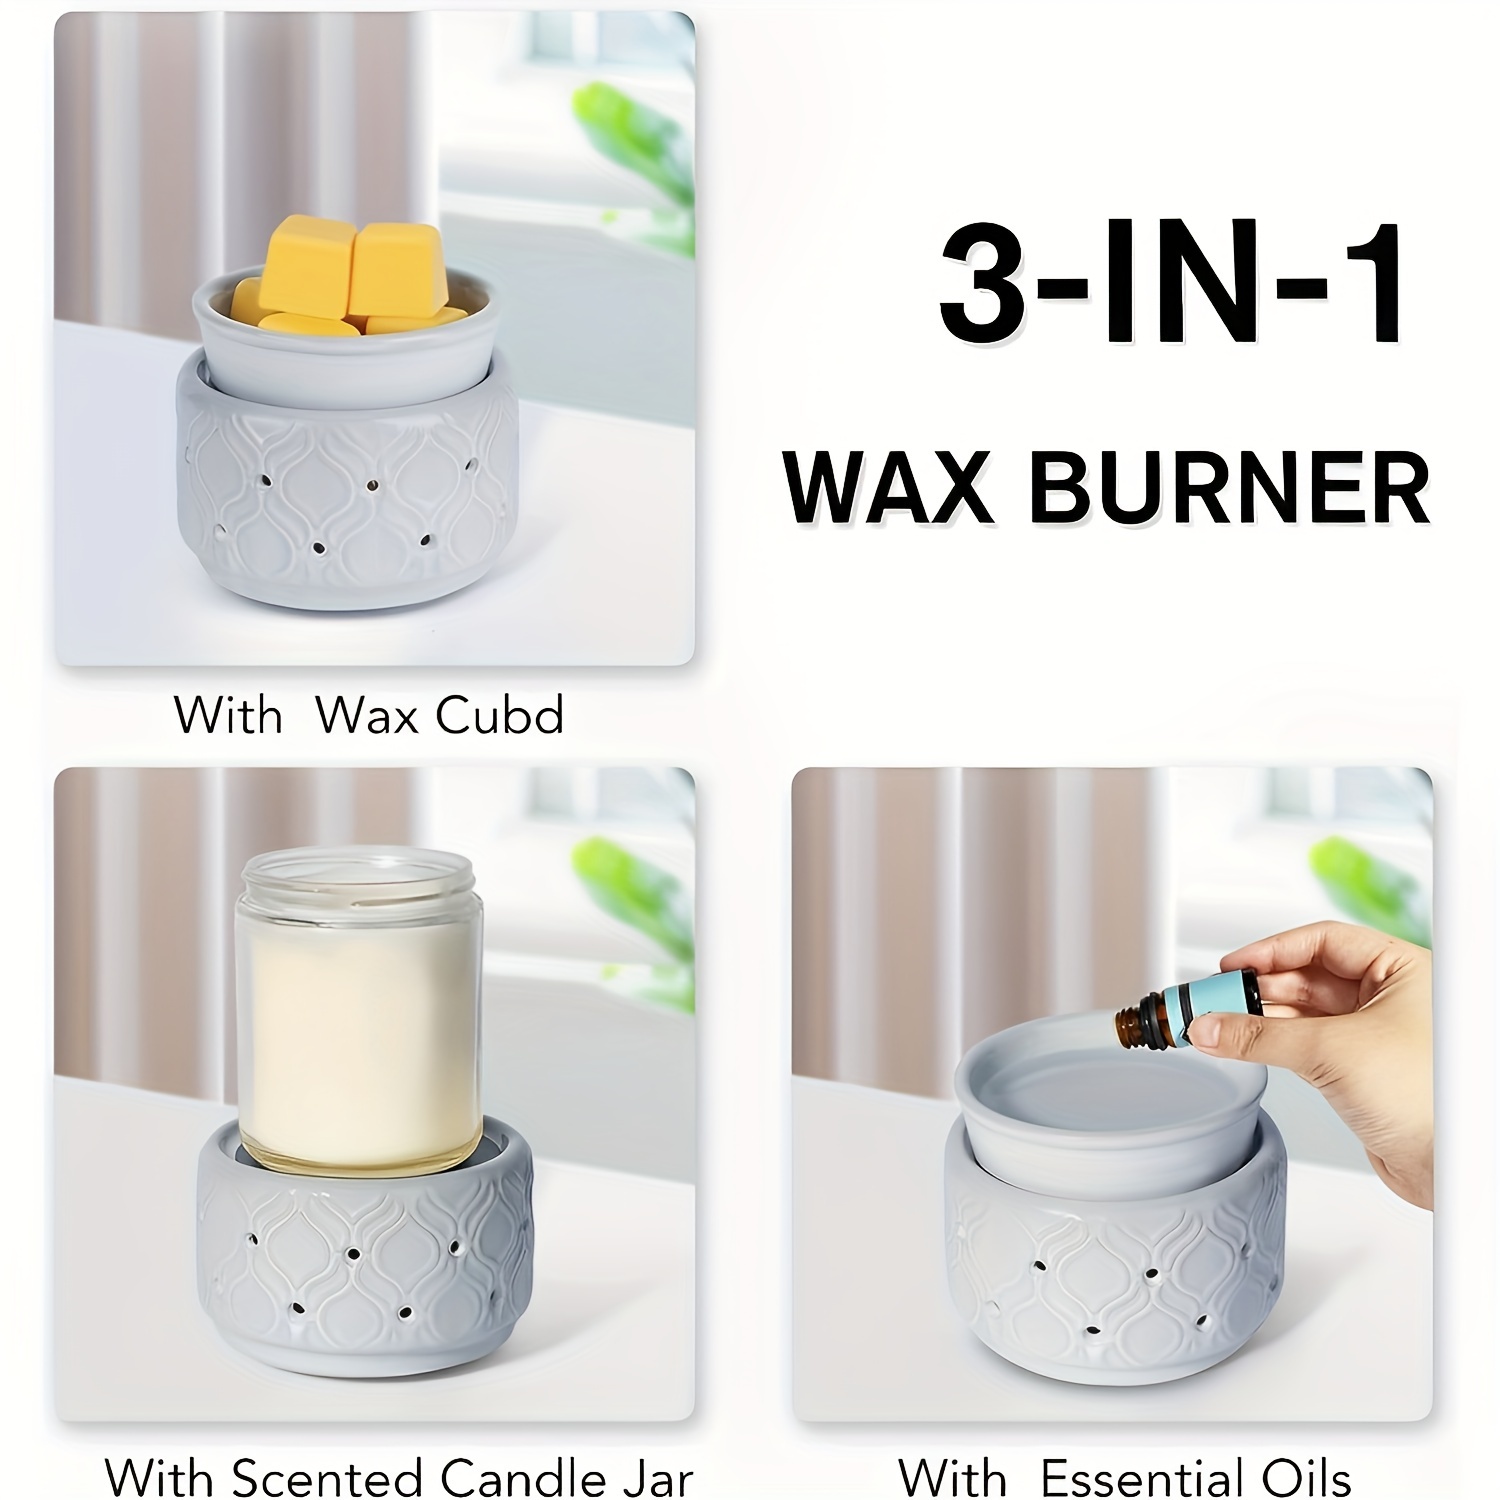 Ceramic Wax Melt Warmer Scentsy Warmer 2-in-1 Candle Wax Melter and Fragrance  Warmer for Wax Cube or Melts to Spa Home Office